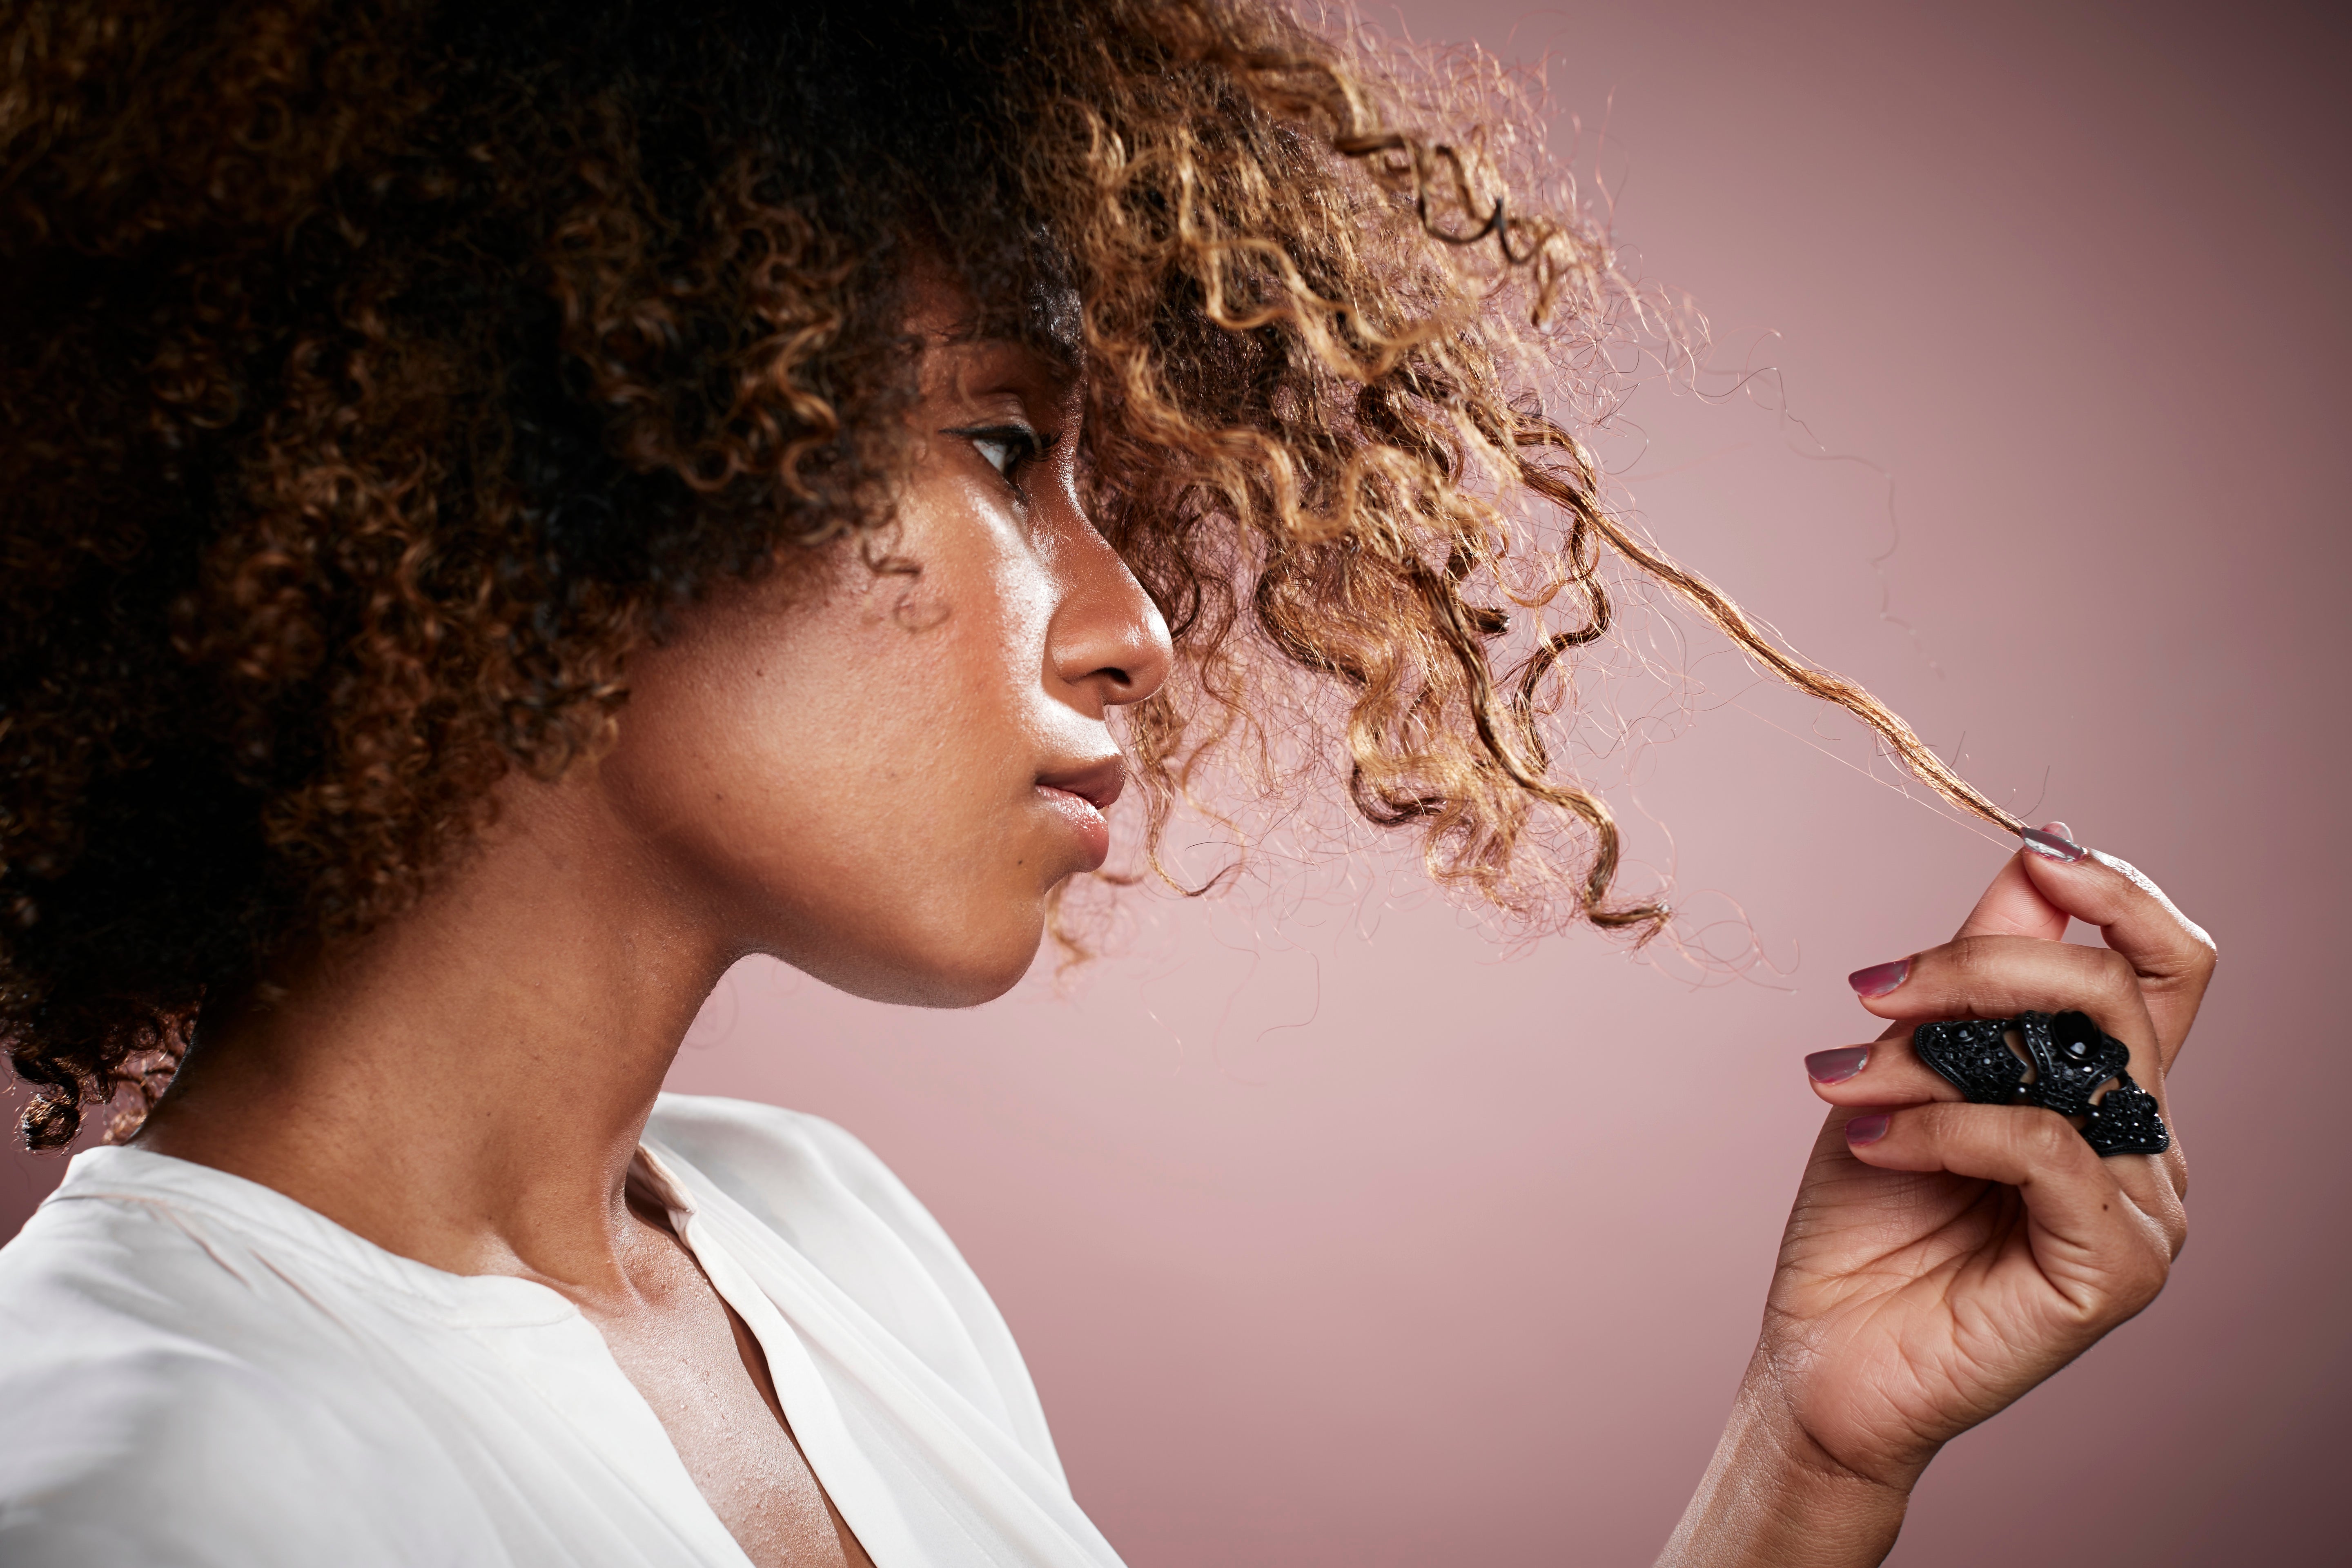 Are Split Ends The Reason Your Hair Won't Grow? 6 Signs It's Time To Trim Your Ends
